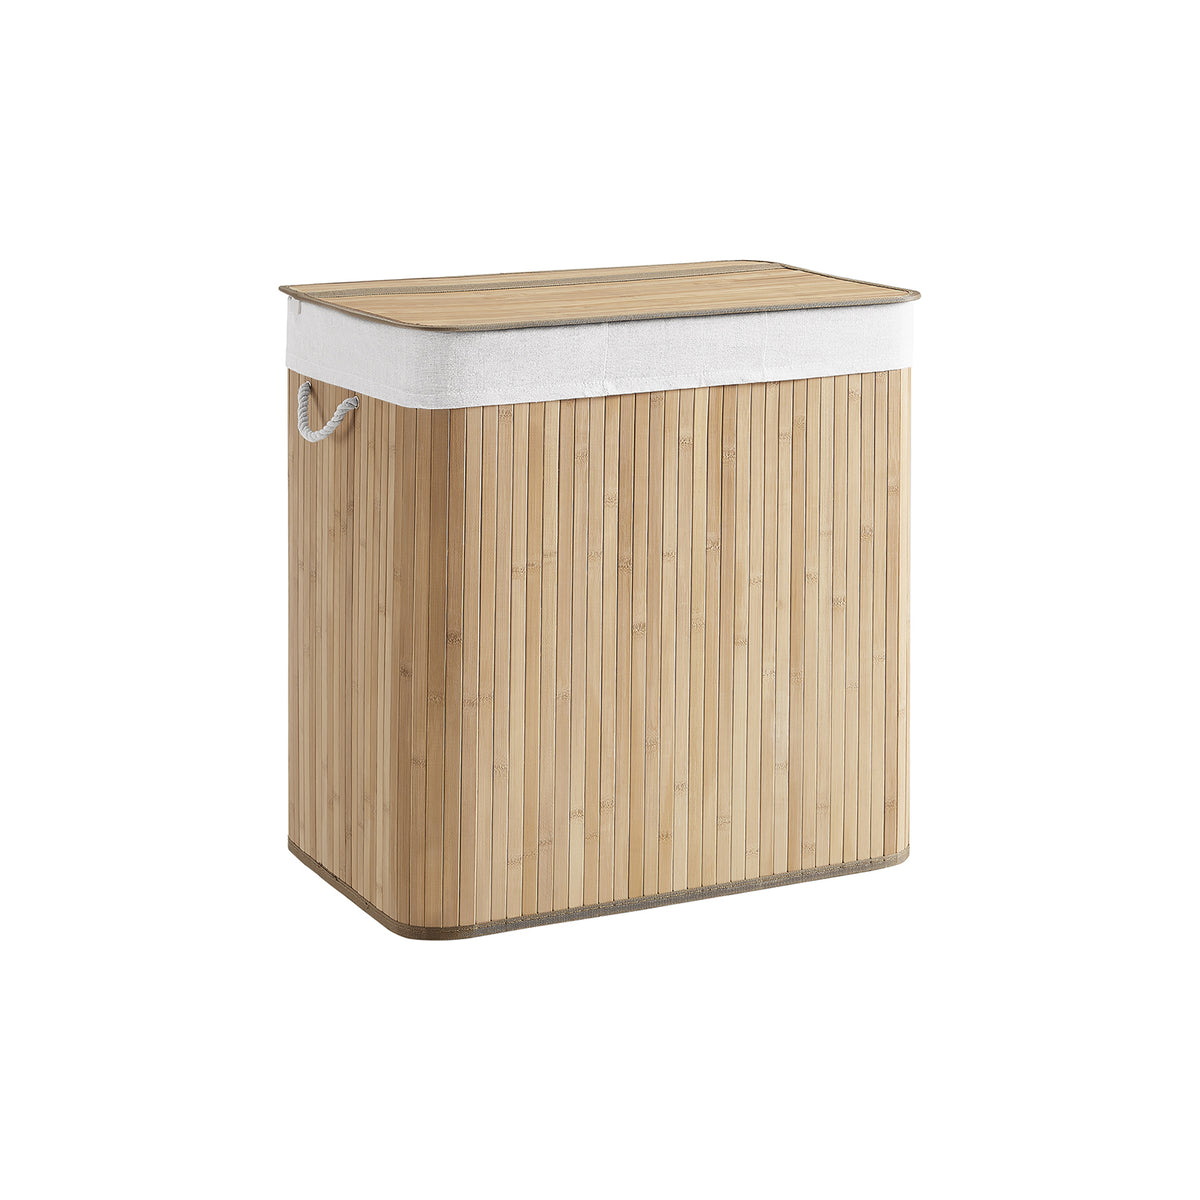 SONGMICS 3-Section Foldable Laundry Basket with Lid 150L, Natural